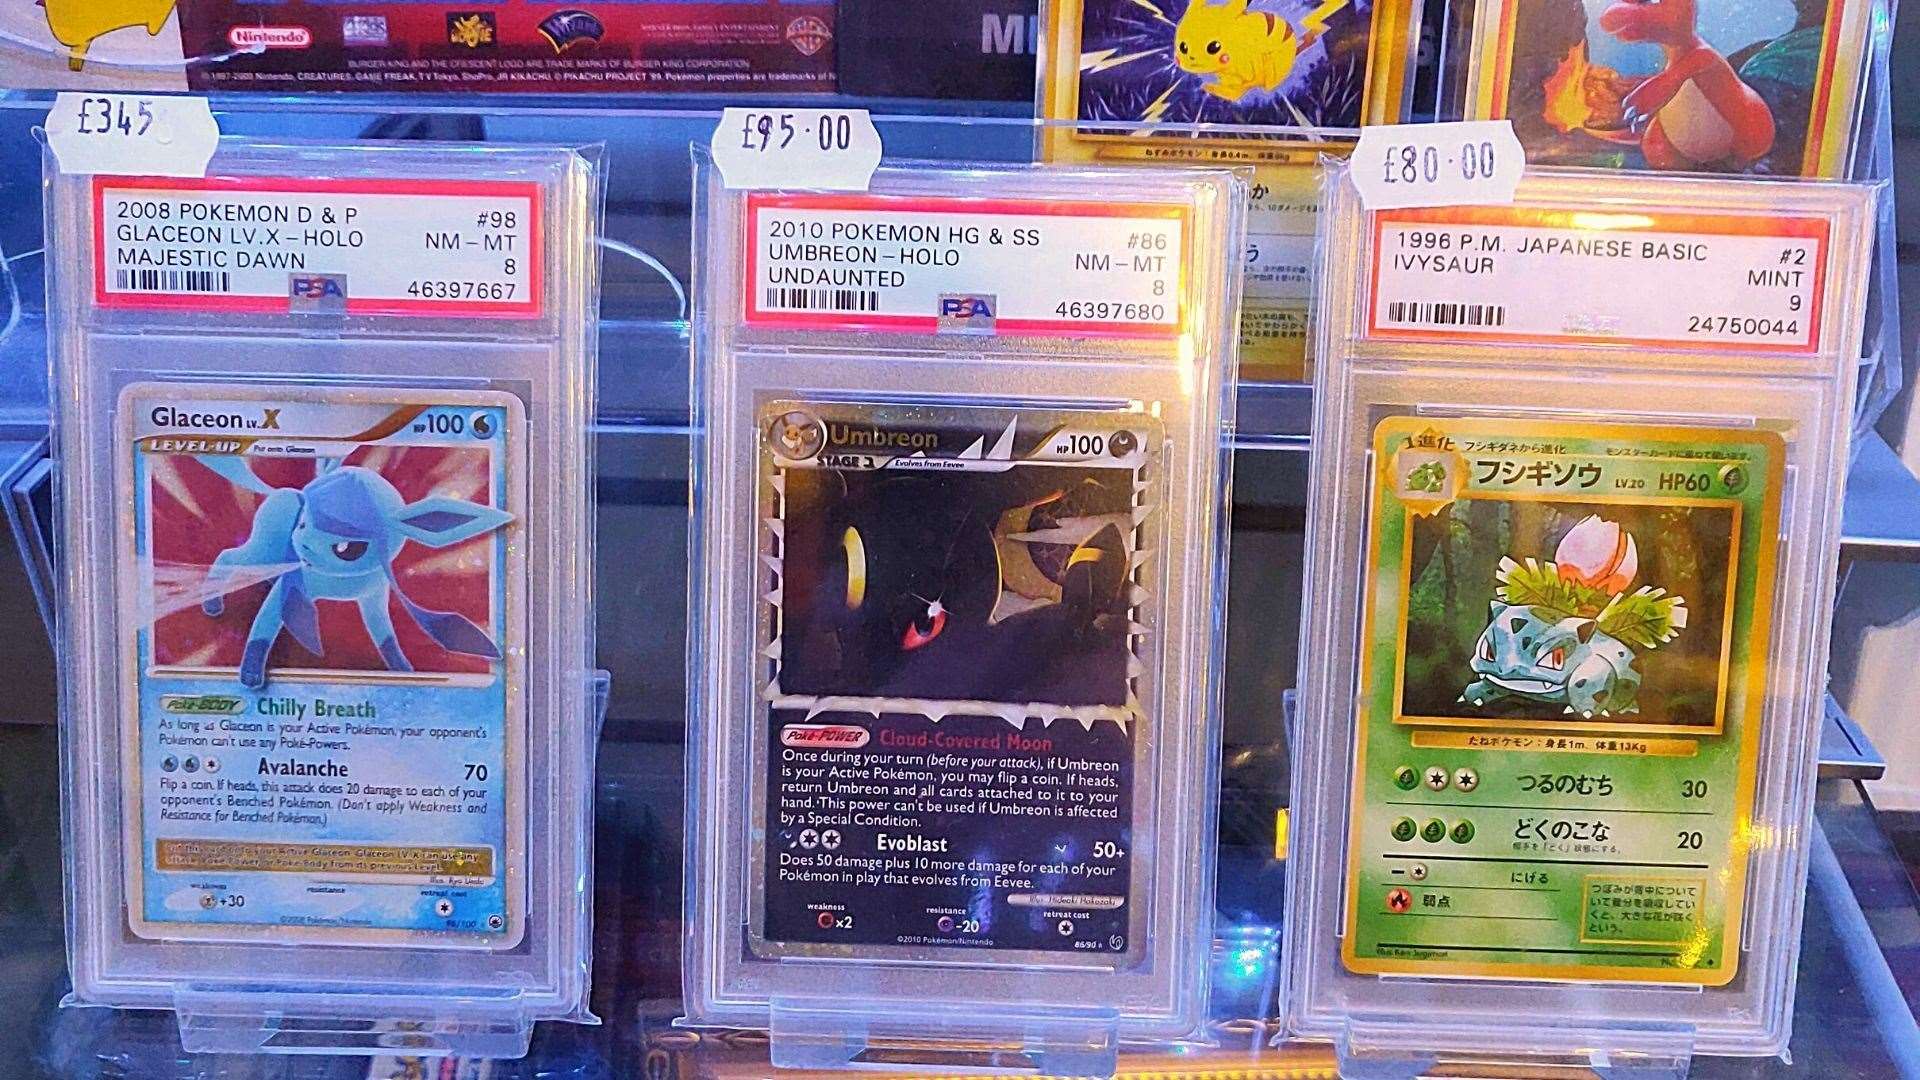 Pokemon cards were a huge craze - now many are worth a small fortune